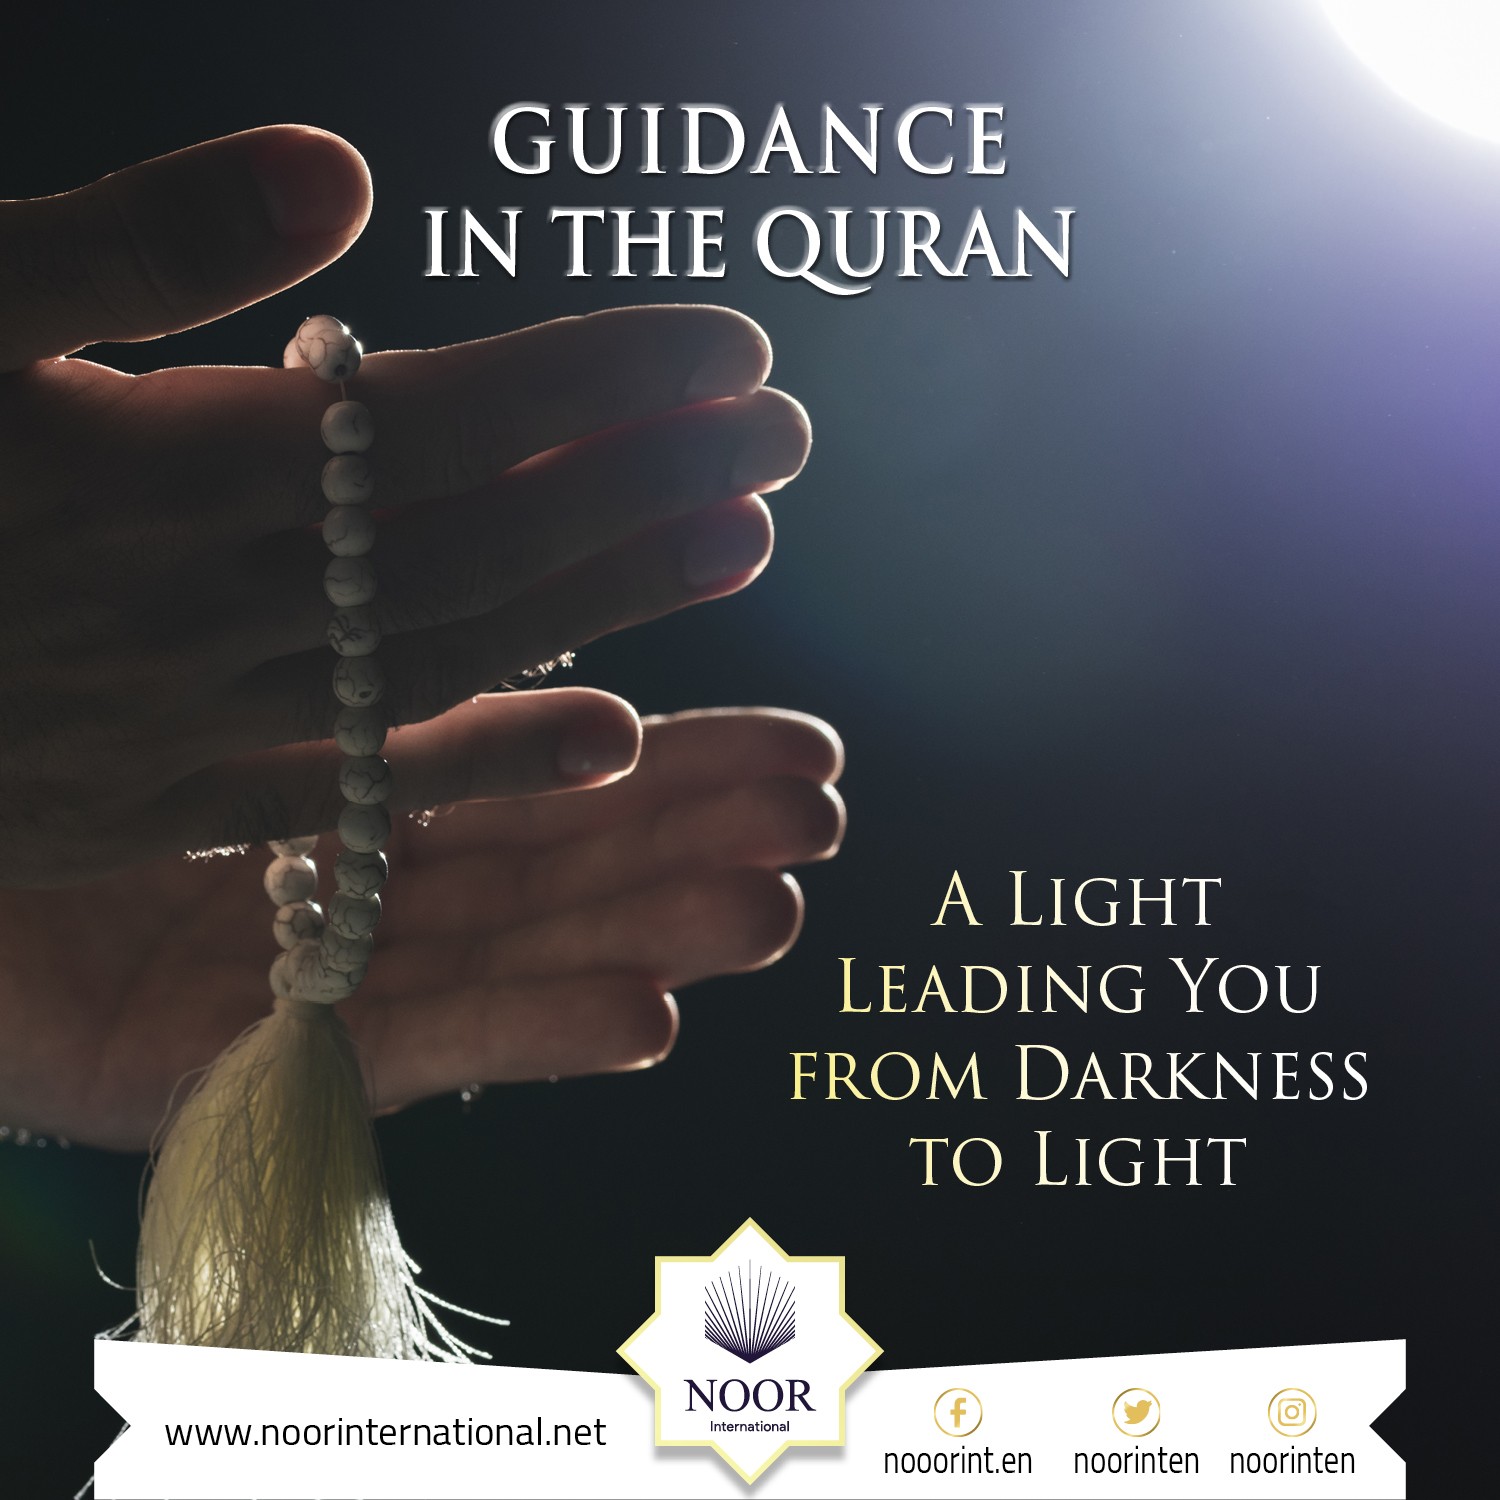 Guidance in the Quran: A Light Leading You from Darkness to Light"